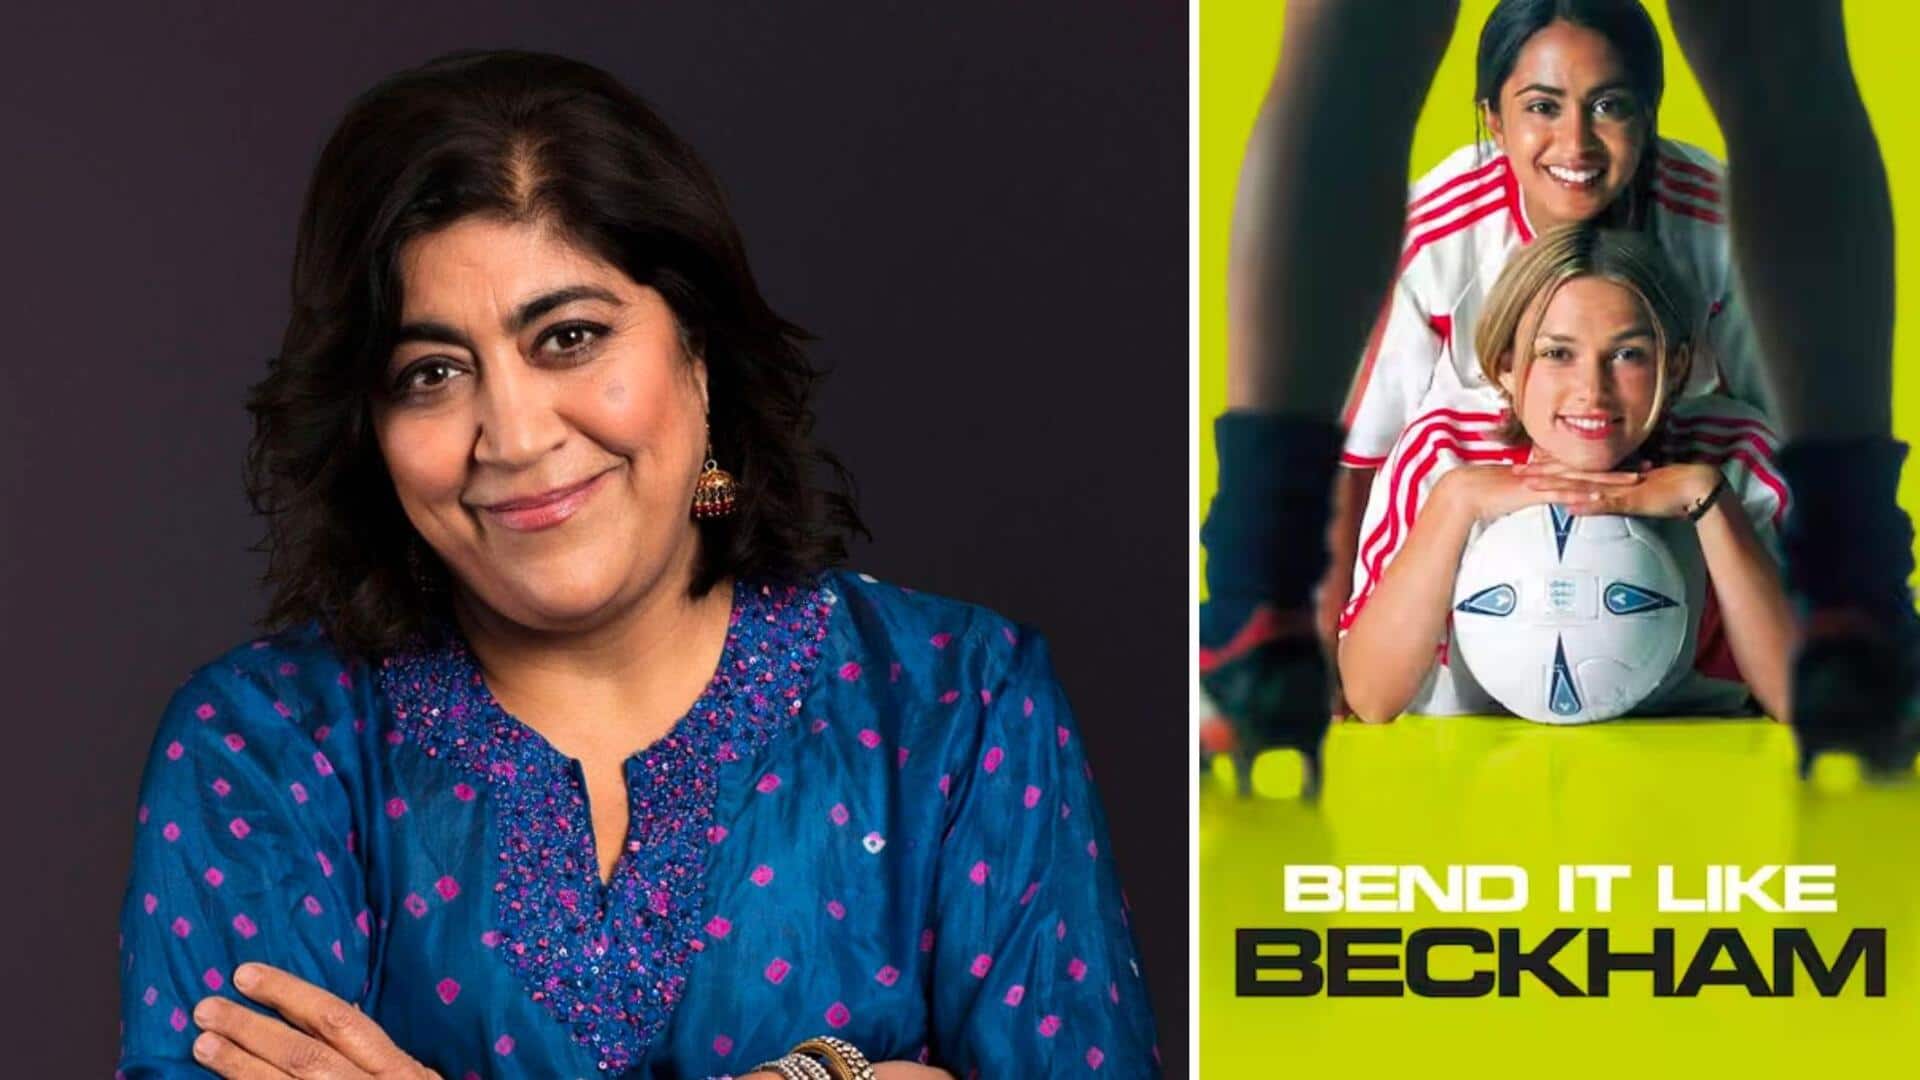 Is 'Bend It Like Beckham' sequel in works? Director reveals